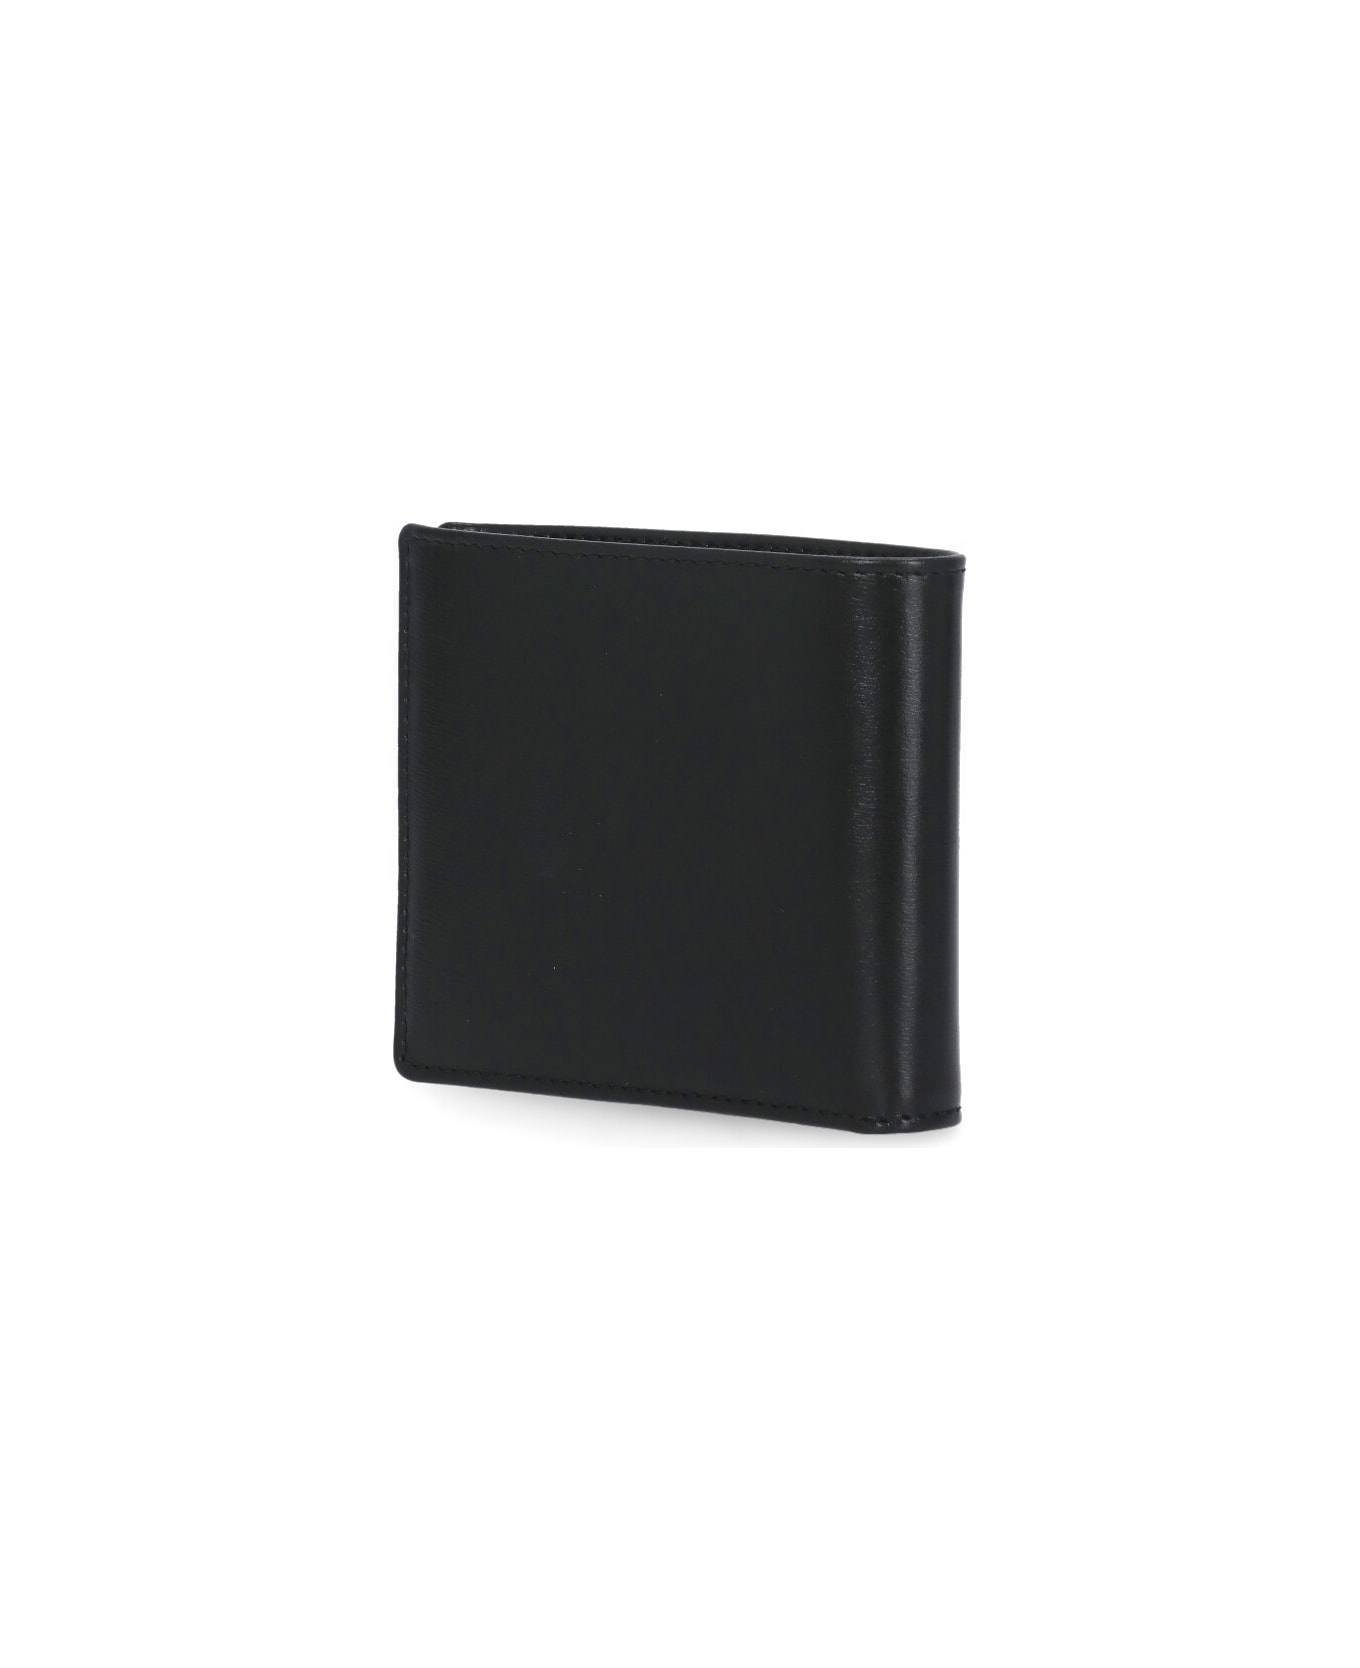 Tod's T Timeless Wallet - Black